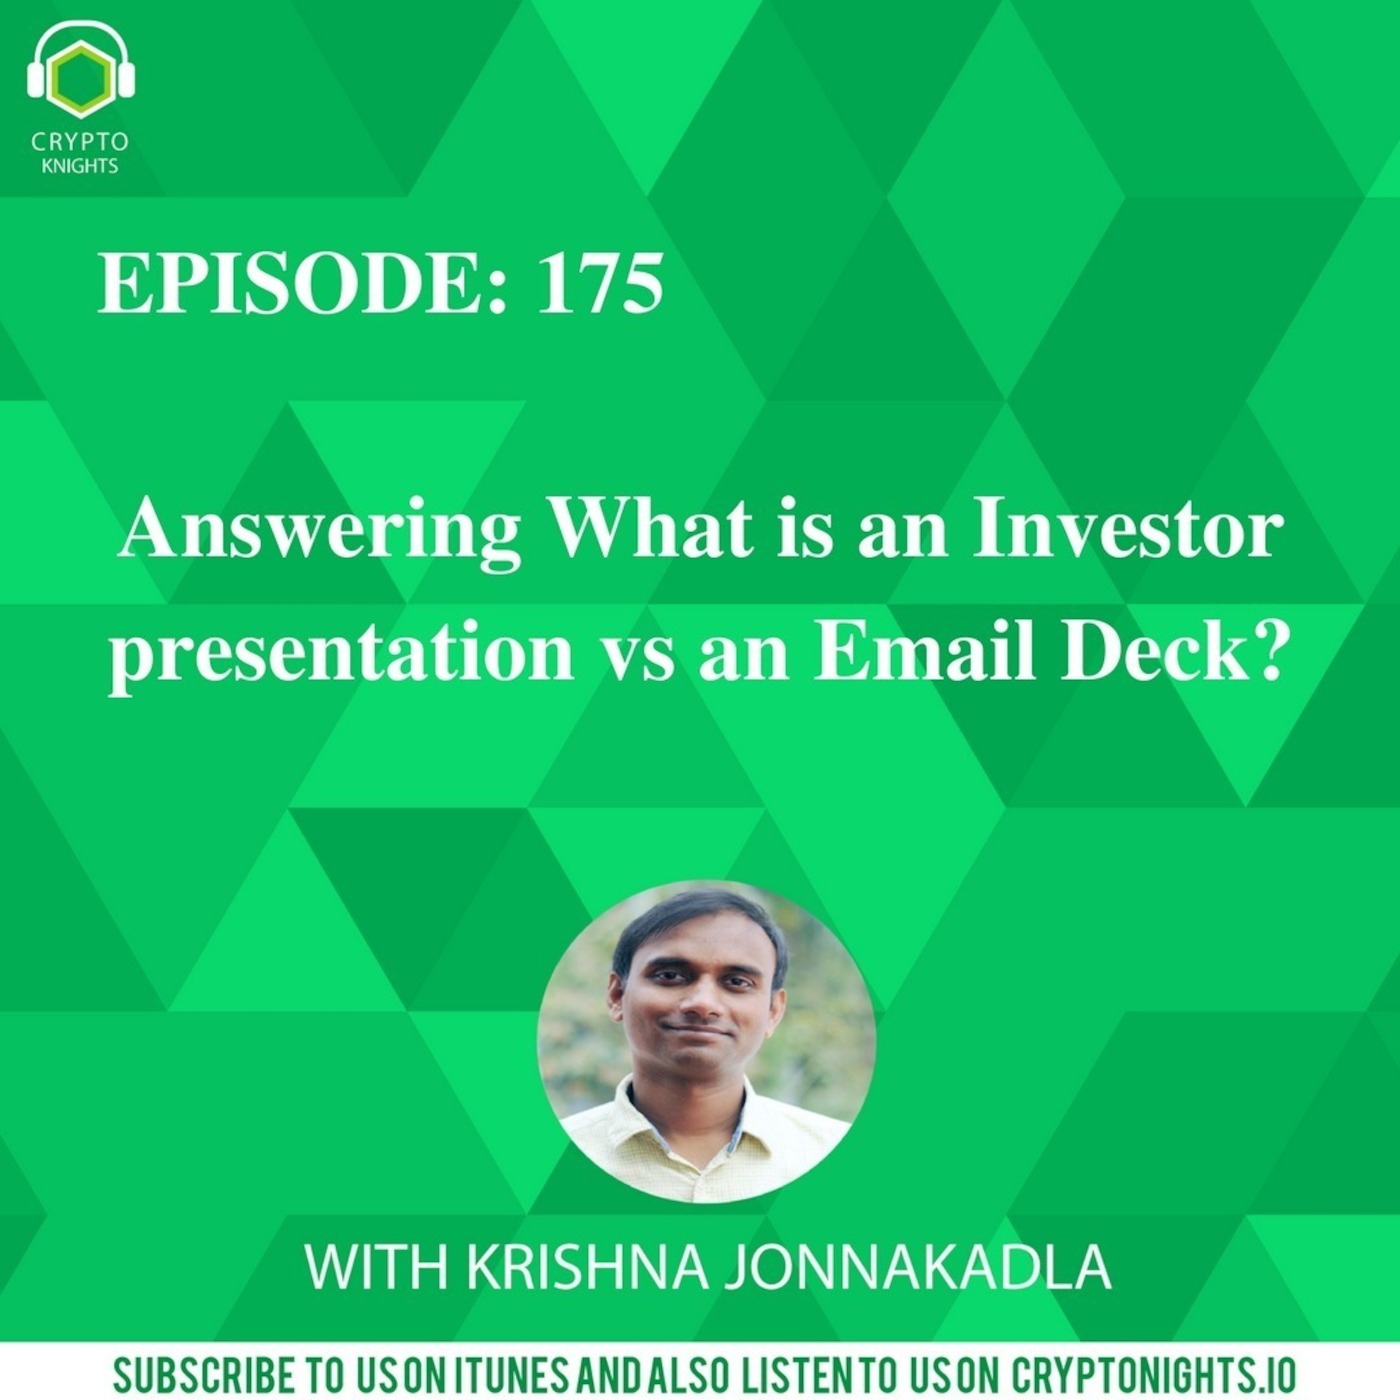 Episode 175- What is an Investor presentation vs an Email Deck?